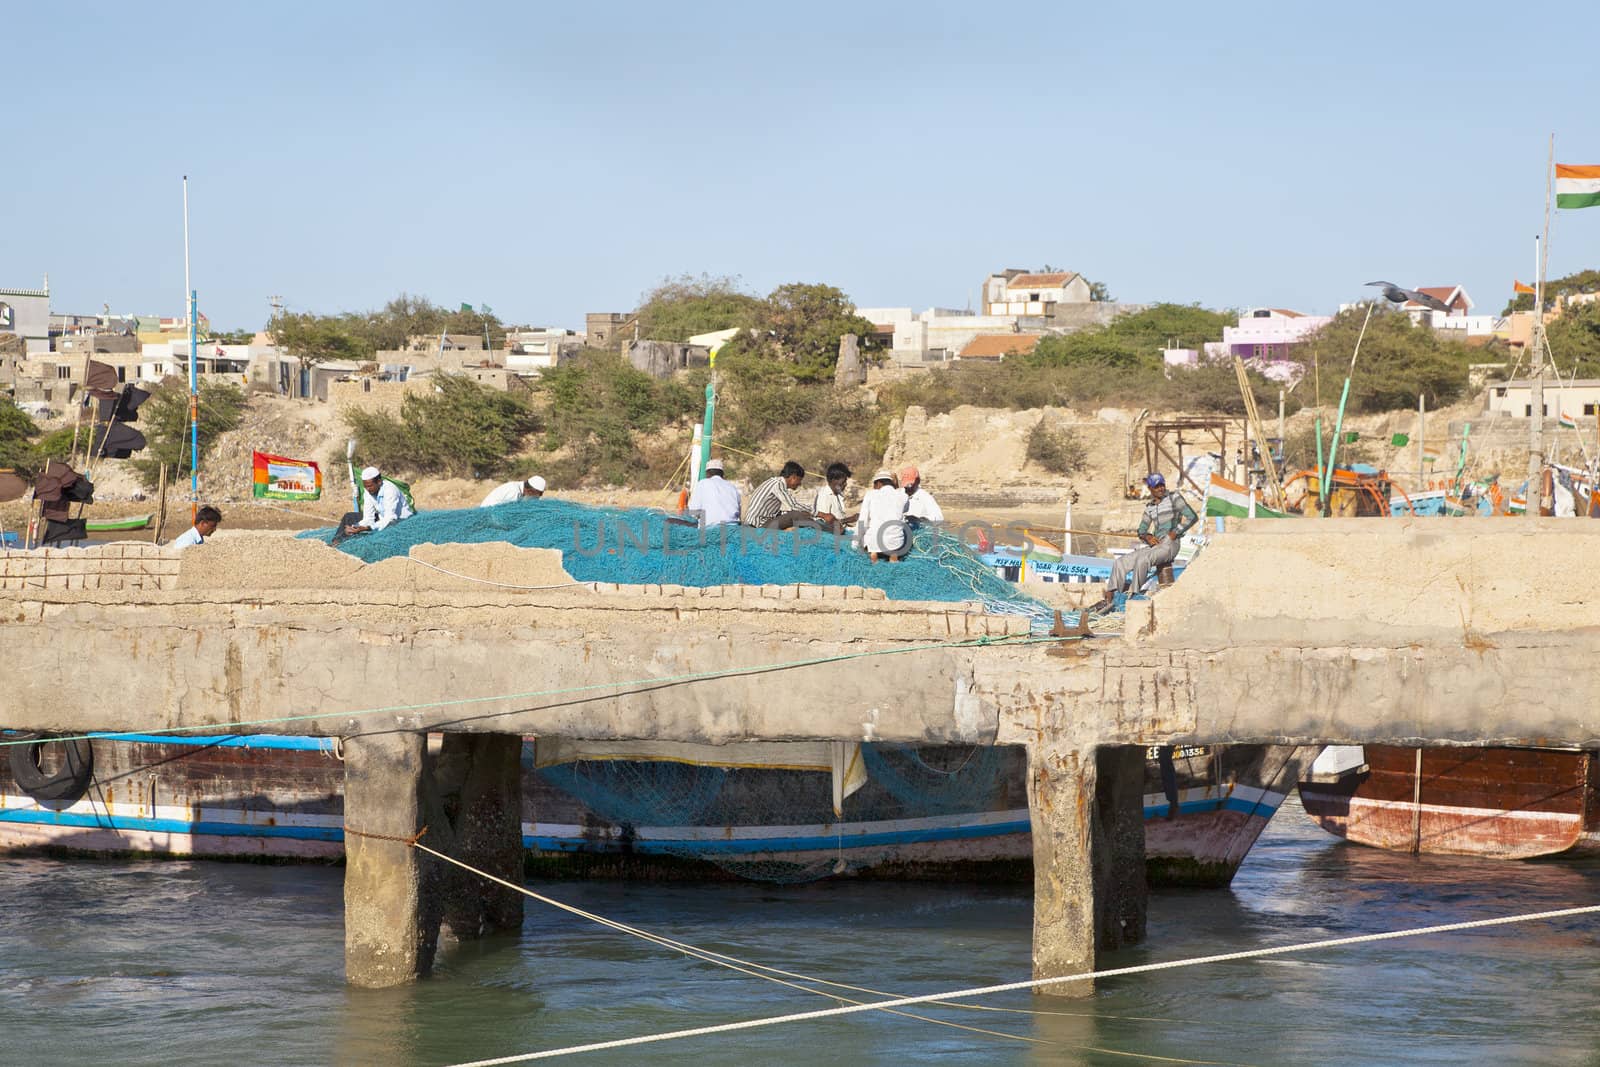 Landscape capture of fishnet menders hard at work under the hot sun at Bet Dwarka pier. Moored and anchored boats in the harbor under a clear blue hazy sky completes an idyllic picturesque scene that separates the mainland from the Island